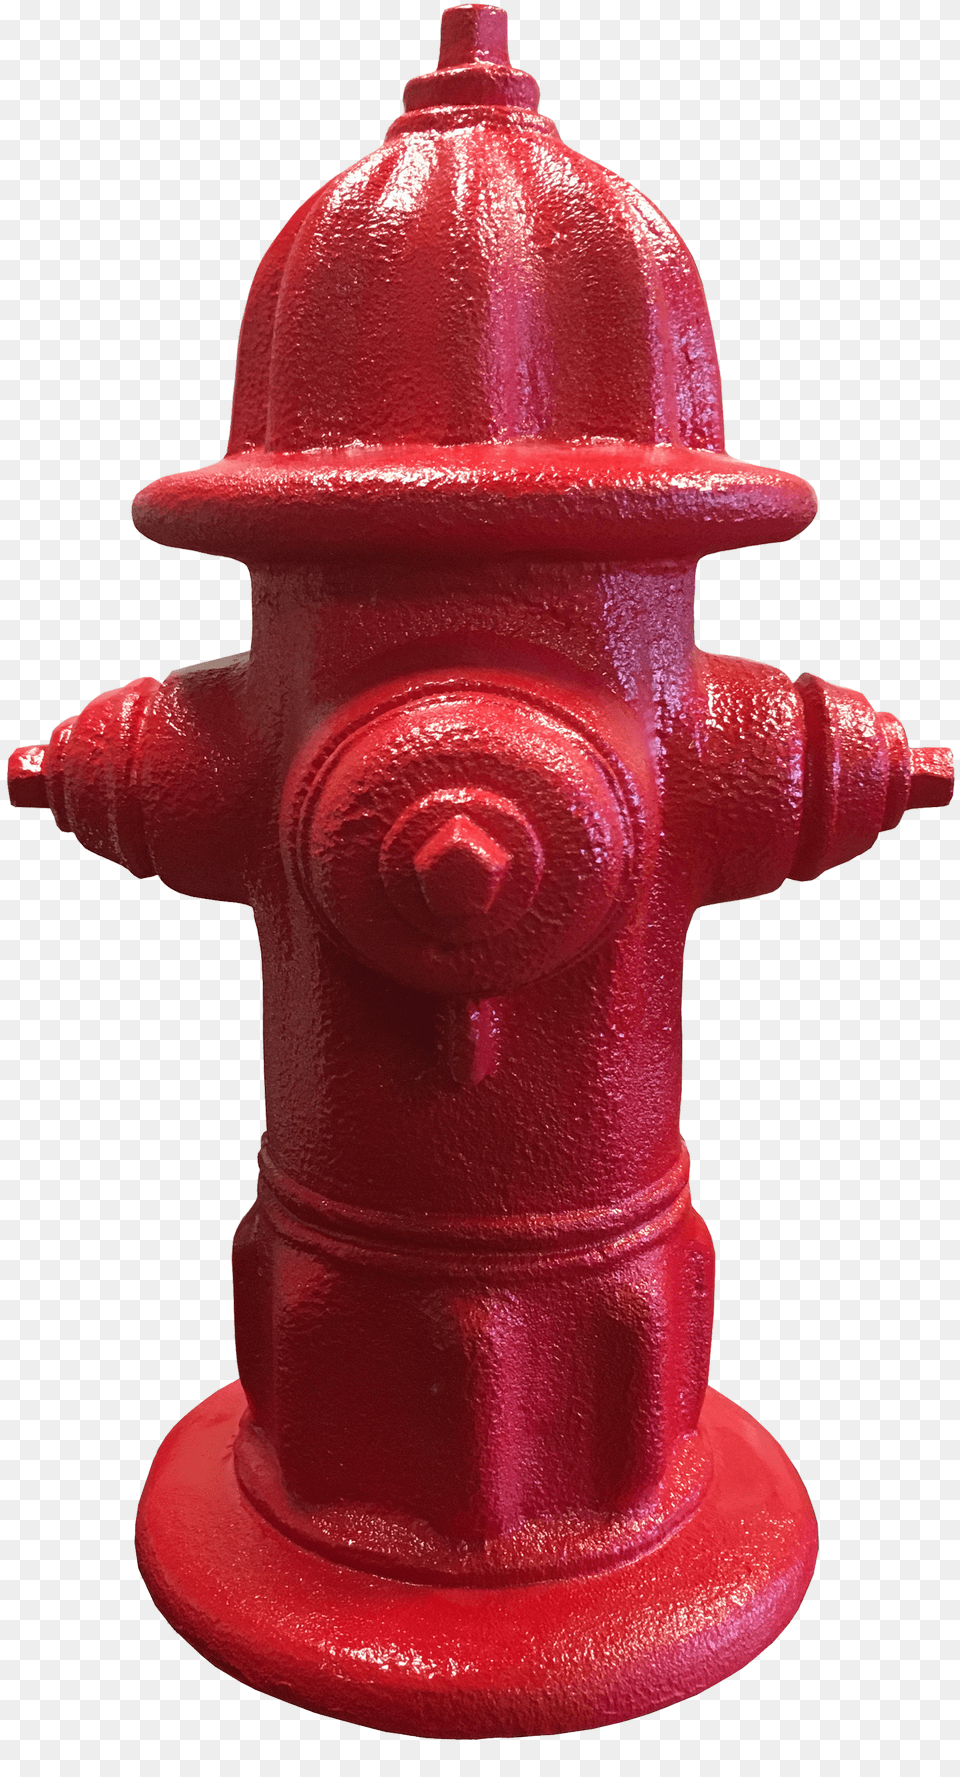 Fire Hydrant Image Background Fire Hydrant, Fire Hydrant Free Transparent Png